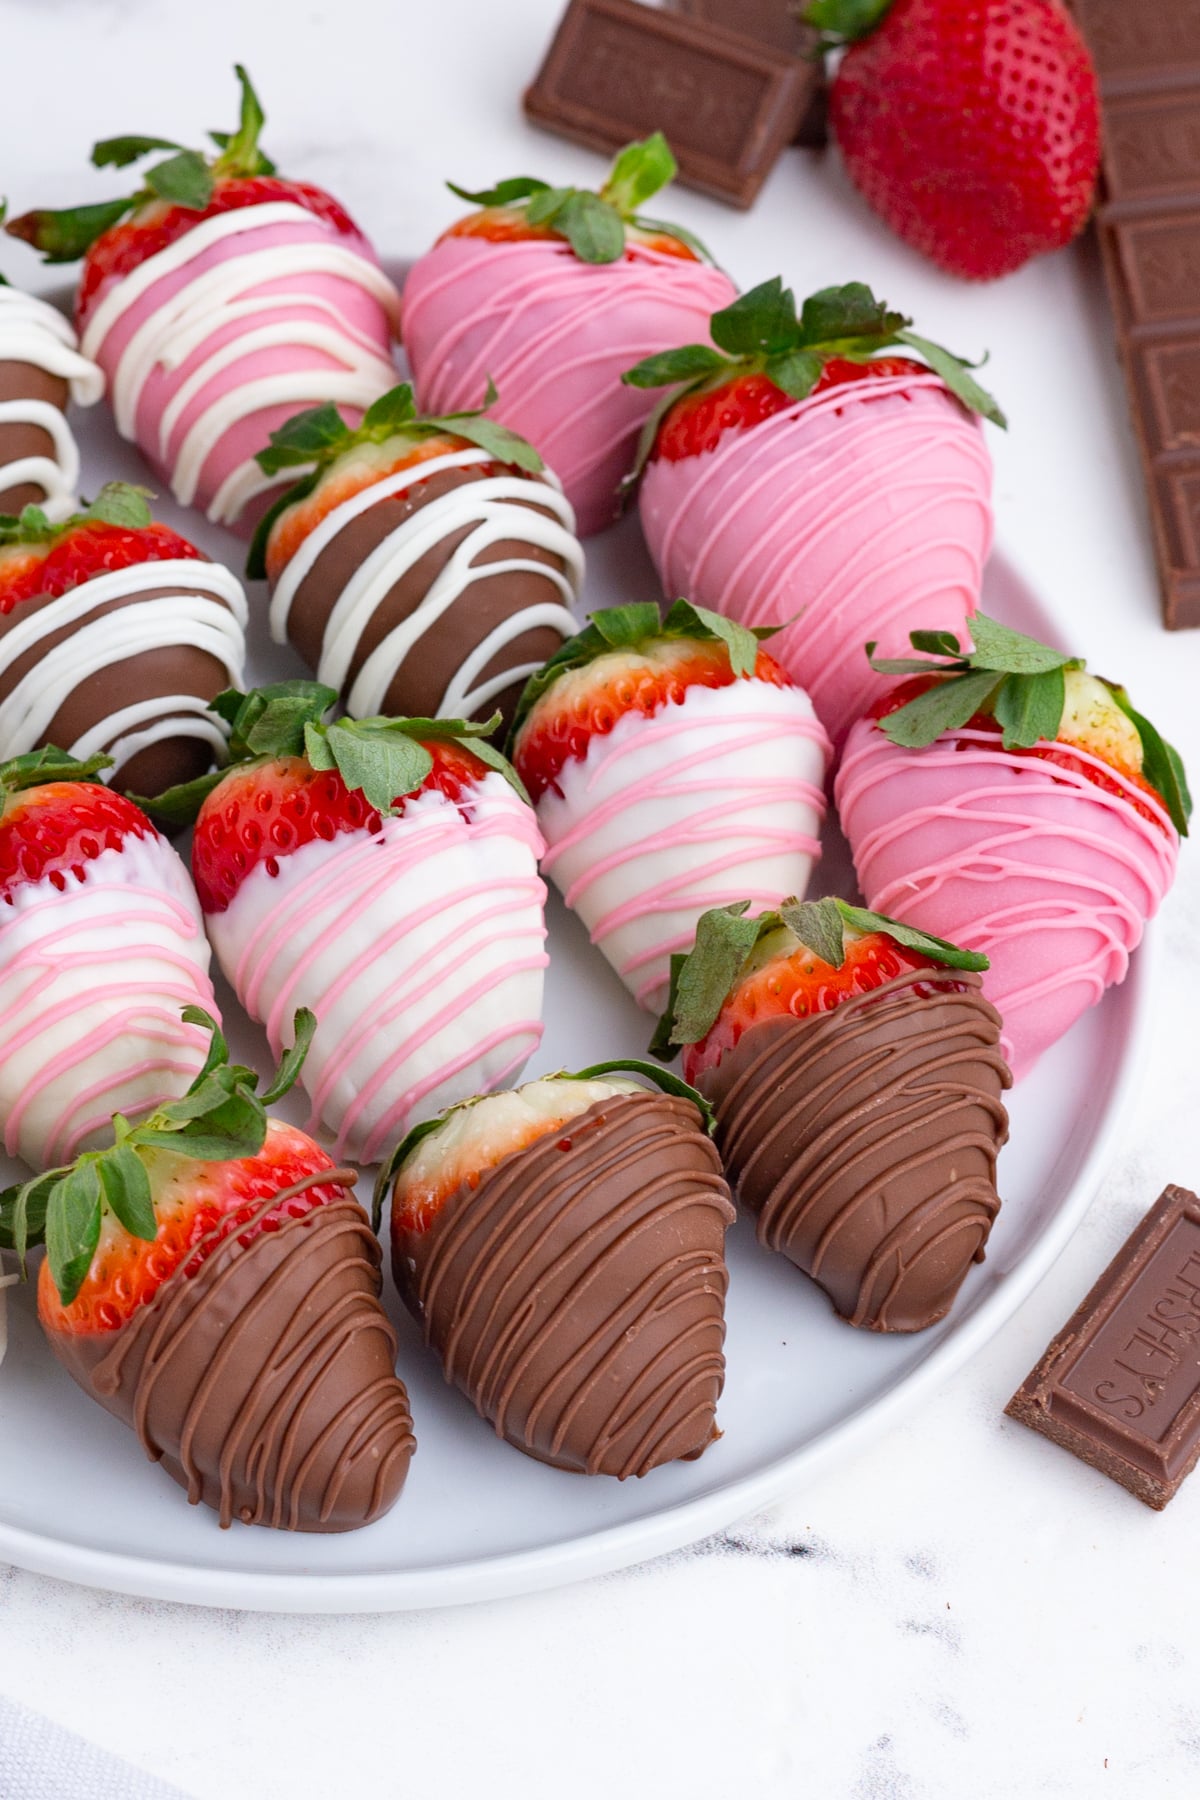 strawberries dipped in chocolate on a serving plate